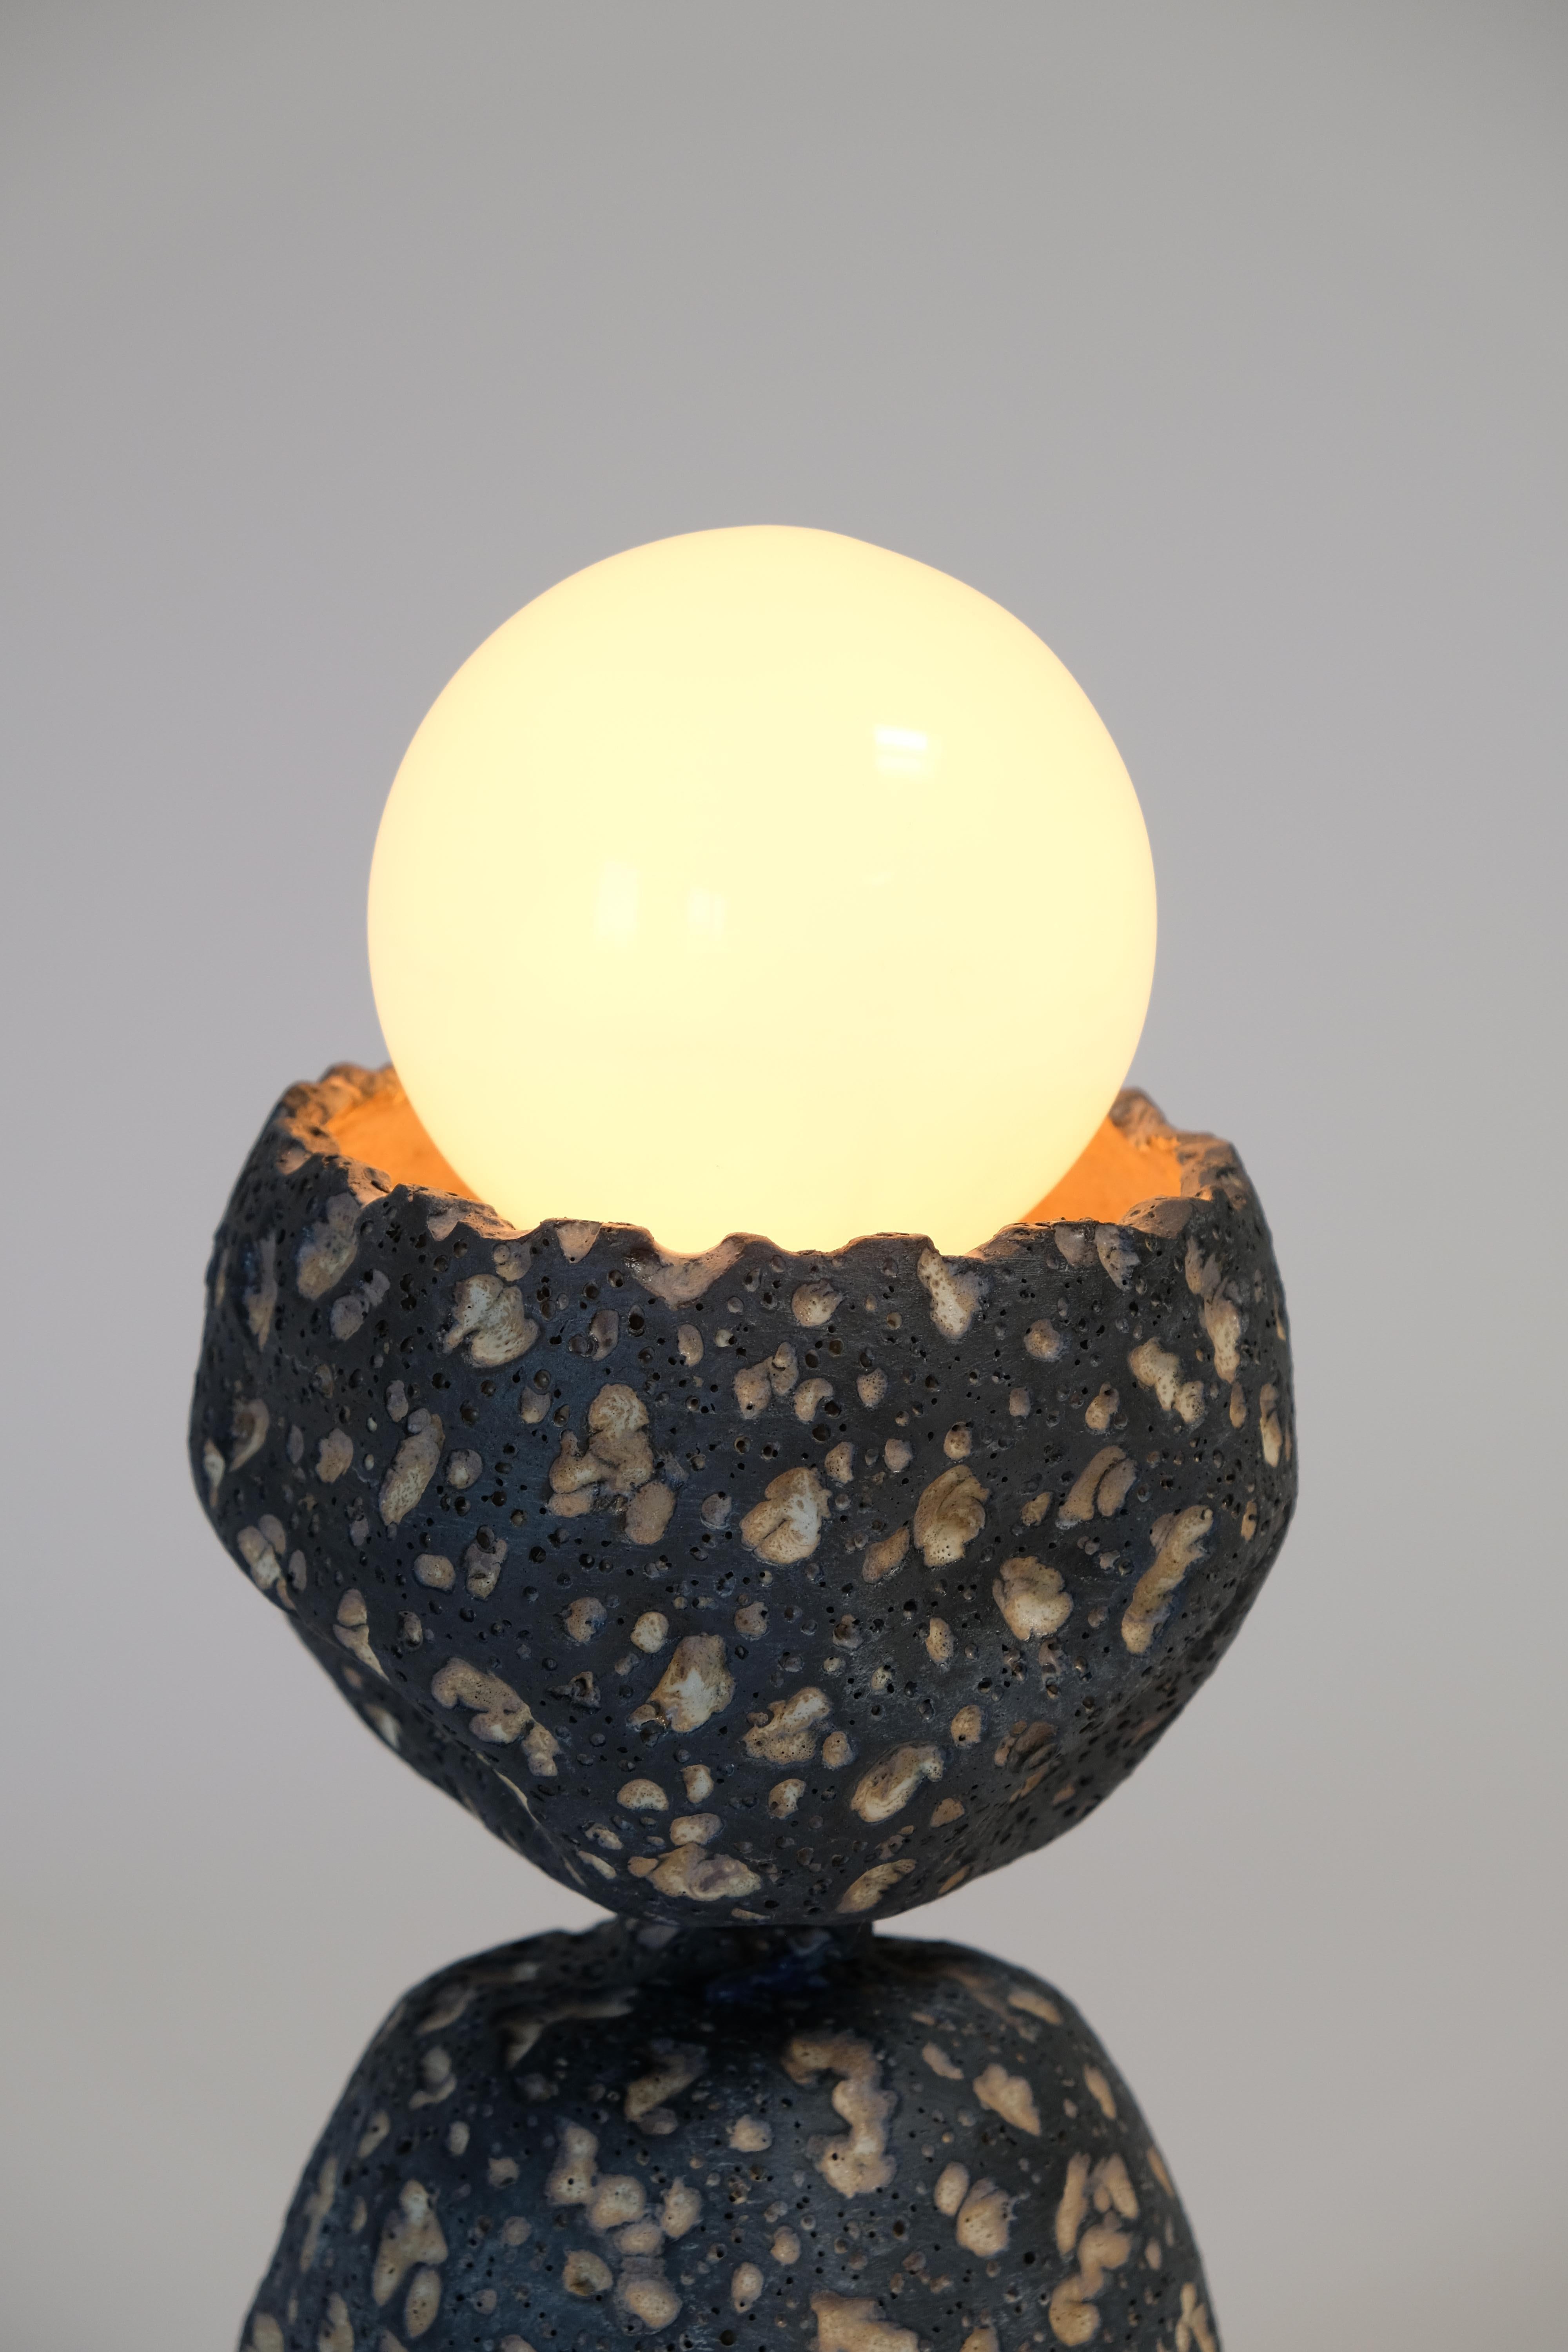 The lithic lamp is a monolithic stone sculpture. A part of LGS's 